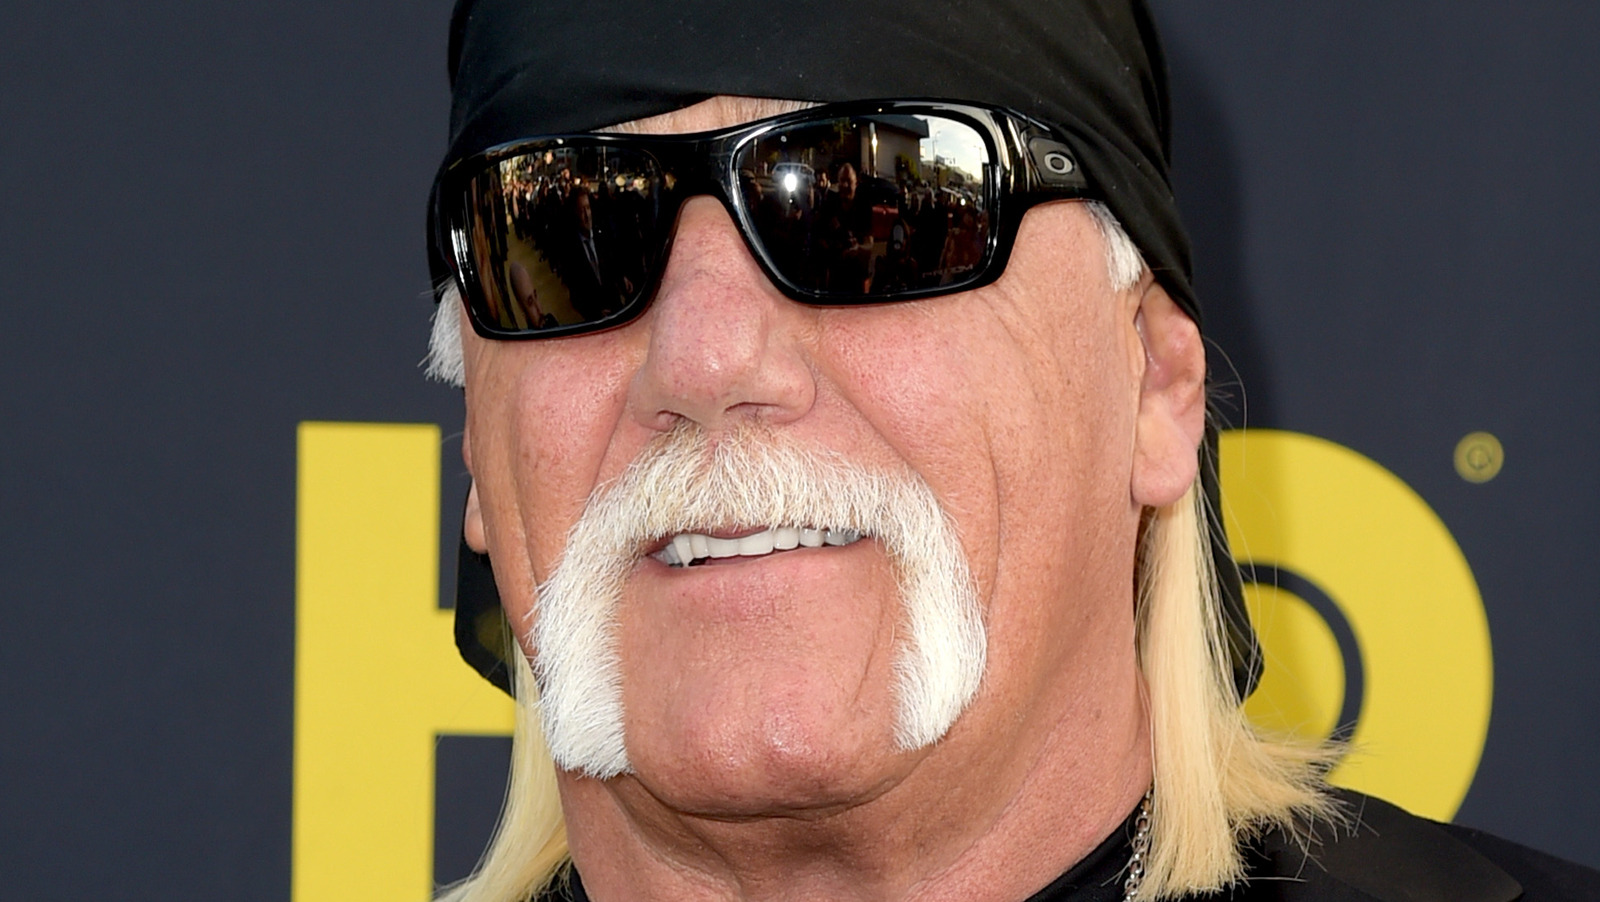 Hulk Hogan Scandals That Nearly Ruined His Career pic